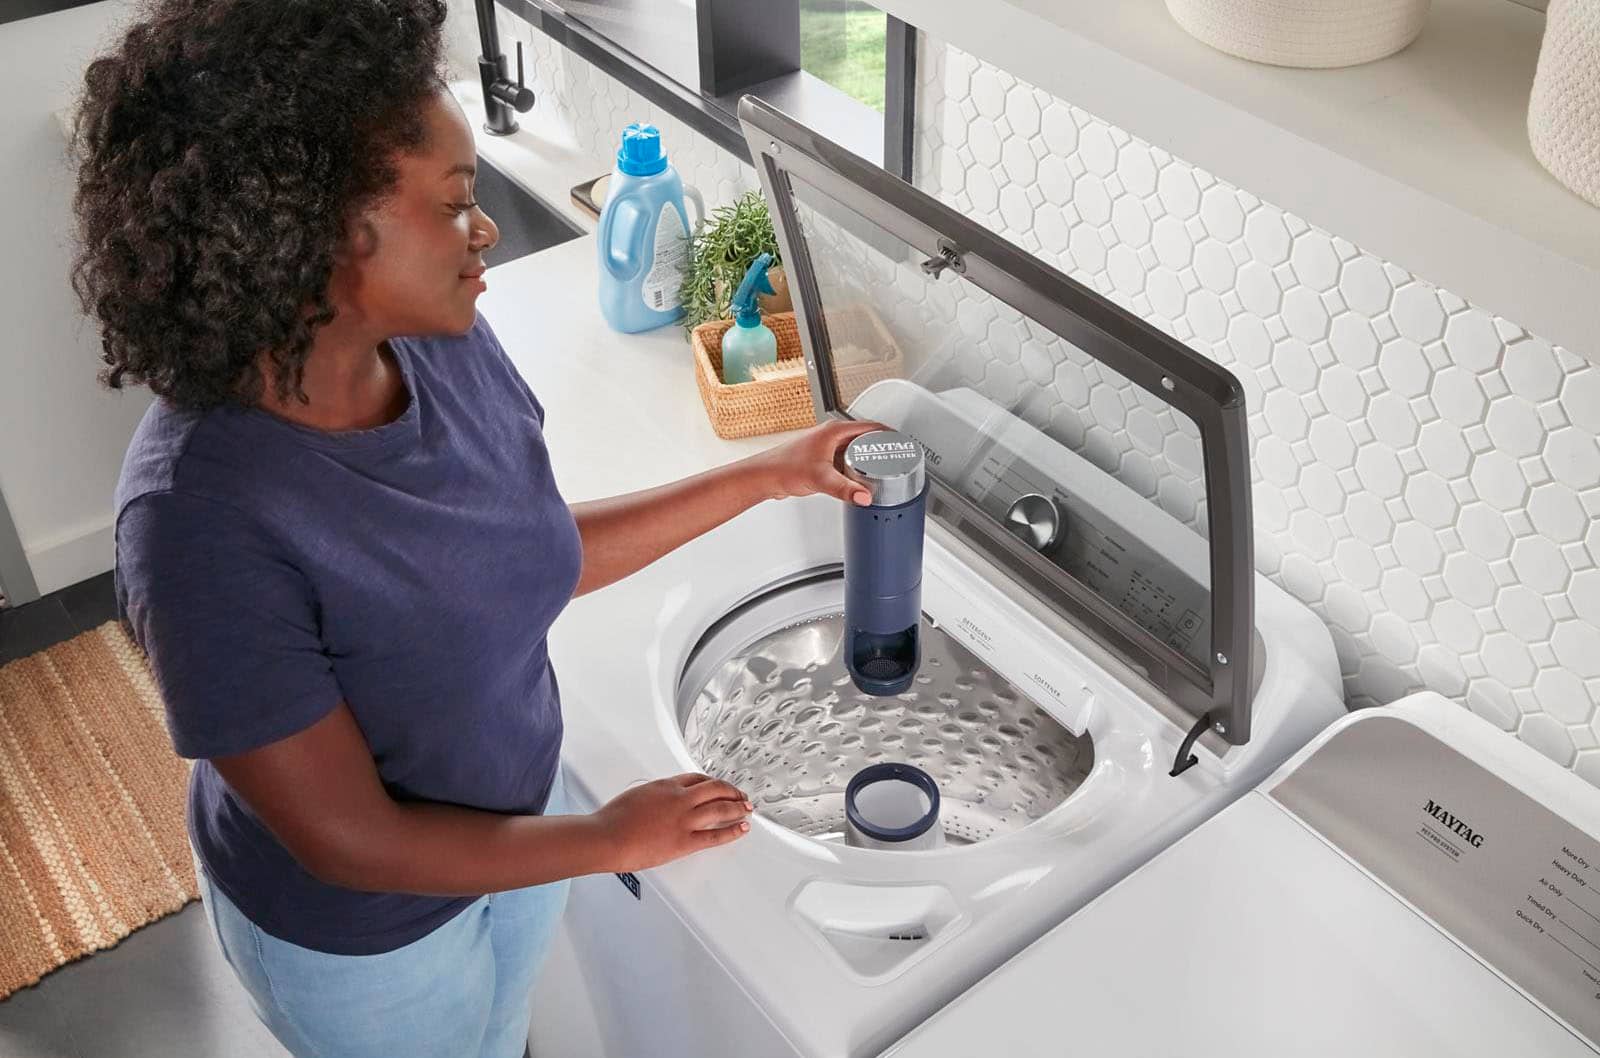 Maytag Washer F20 Code: Causes & 4 Ways To Fix It Now